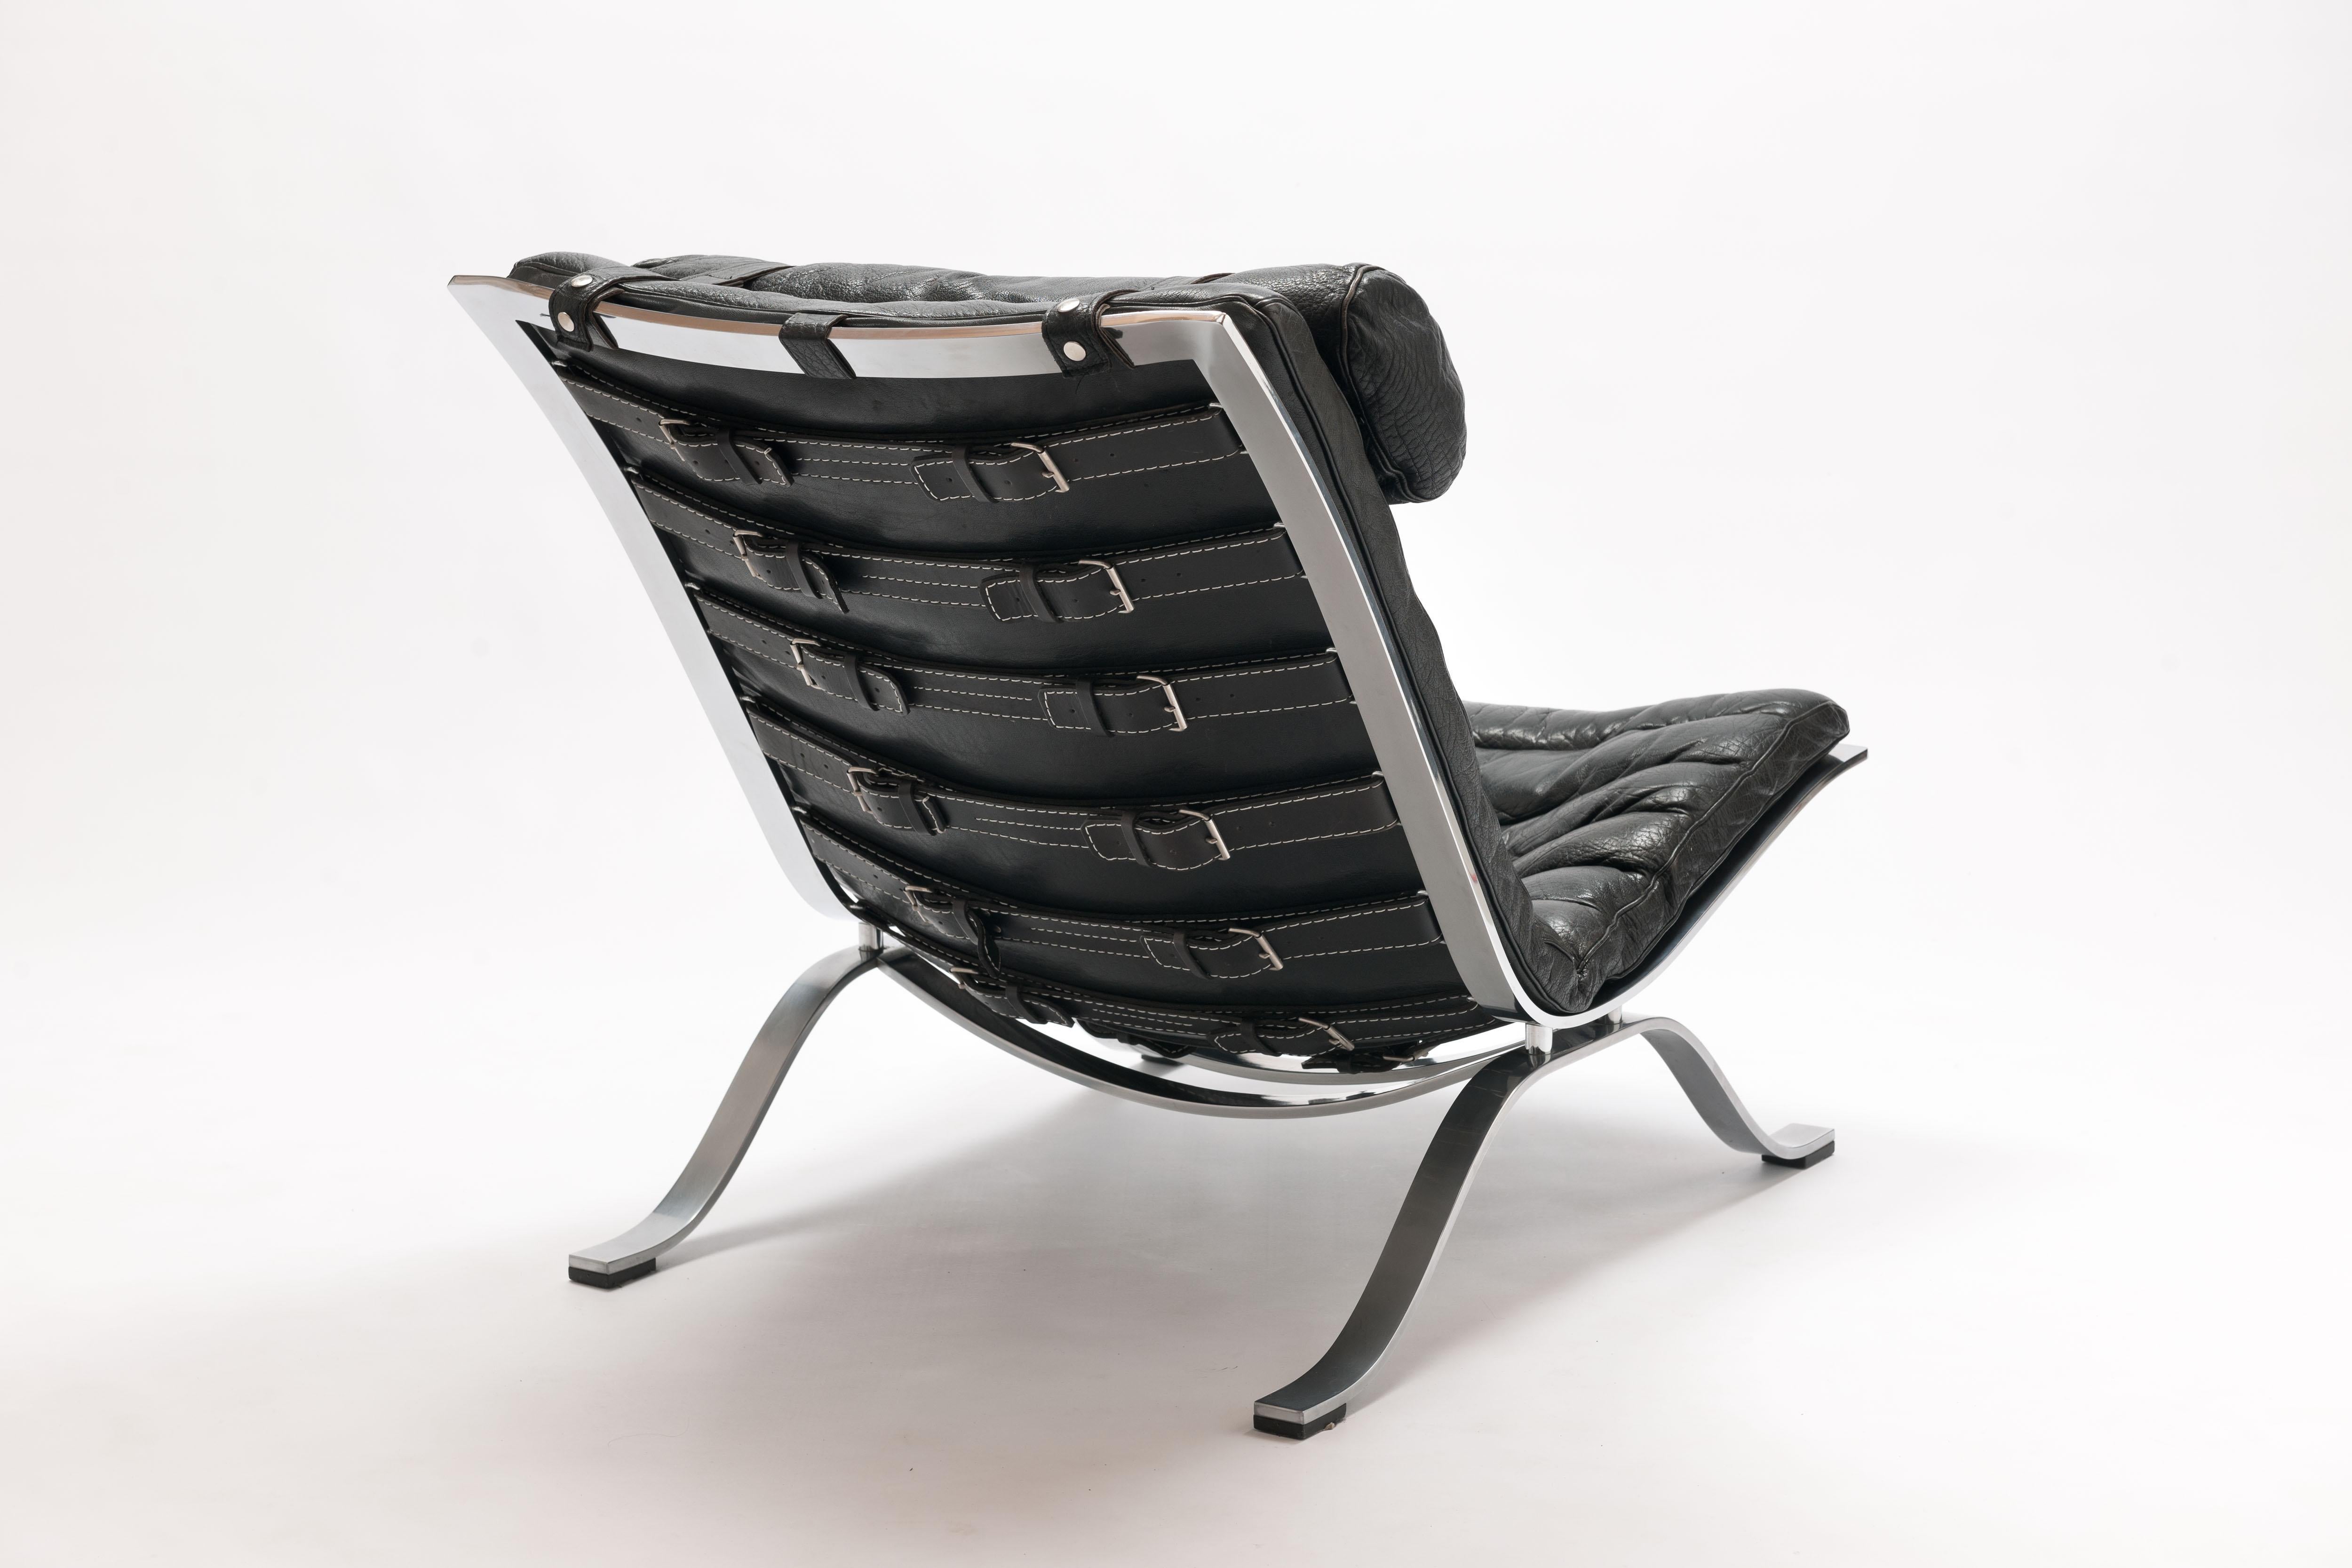 Beautiful vintage Ari lounge chair by Swedish designer Arne Norell for Norell Möbel, designed in 1966. 
This award winning lounge chair is made of heavy high quality flat chrome plated steel and the all original upholstery is executed from black